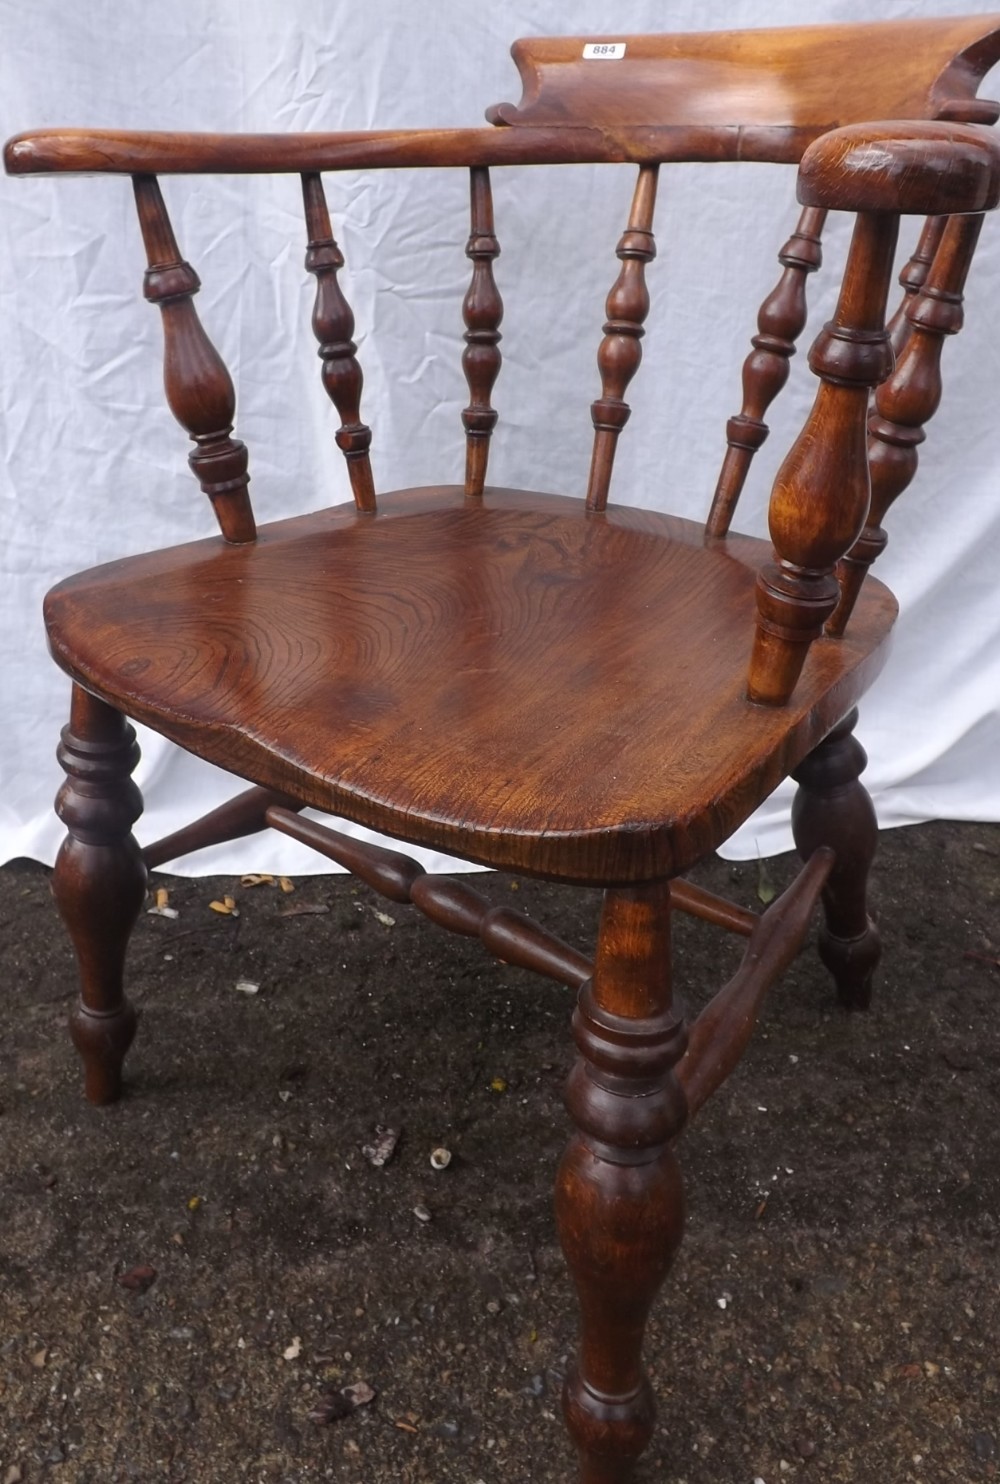 c19 smokers bow chair